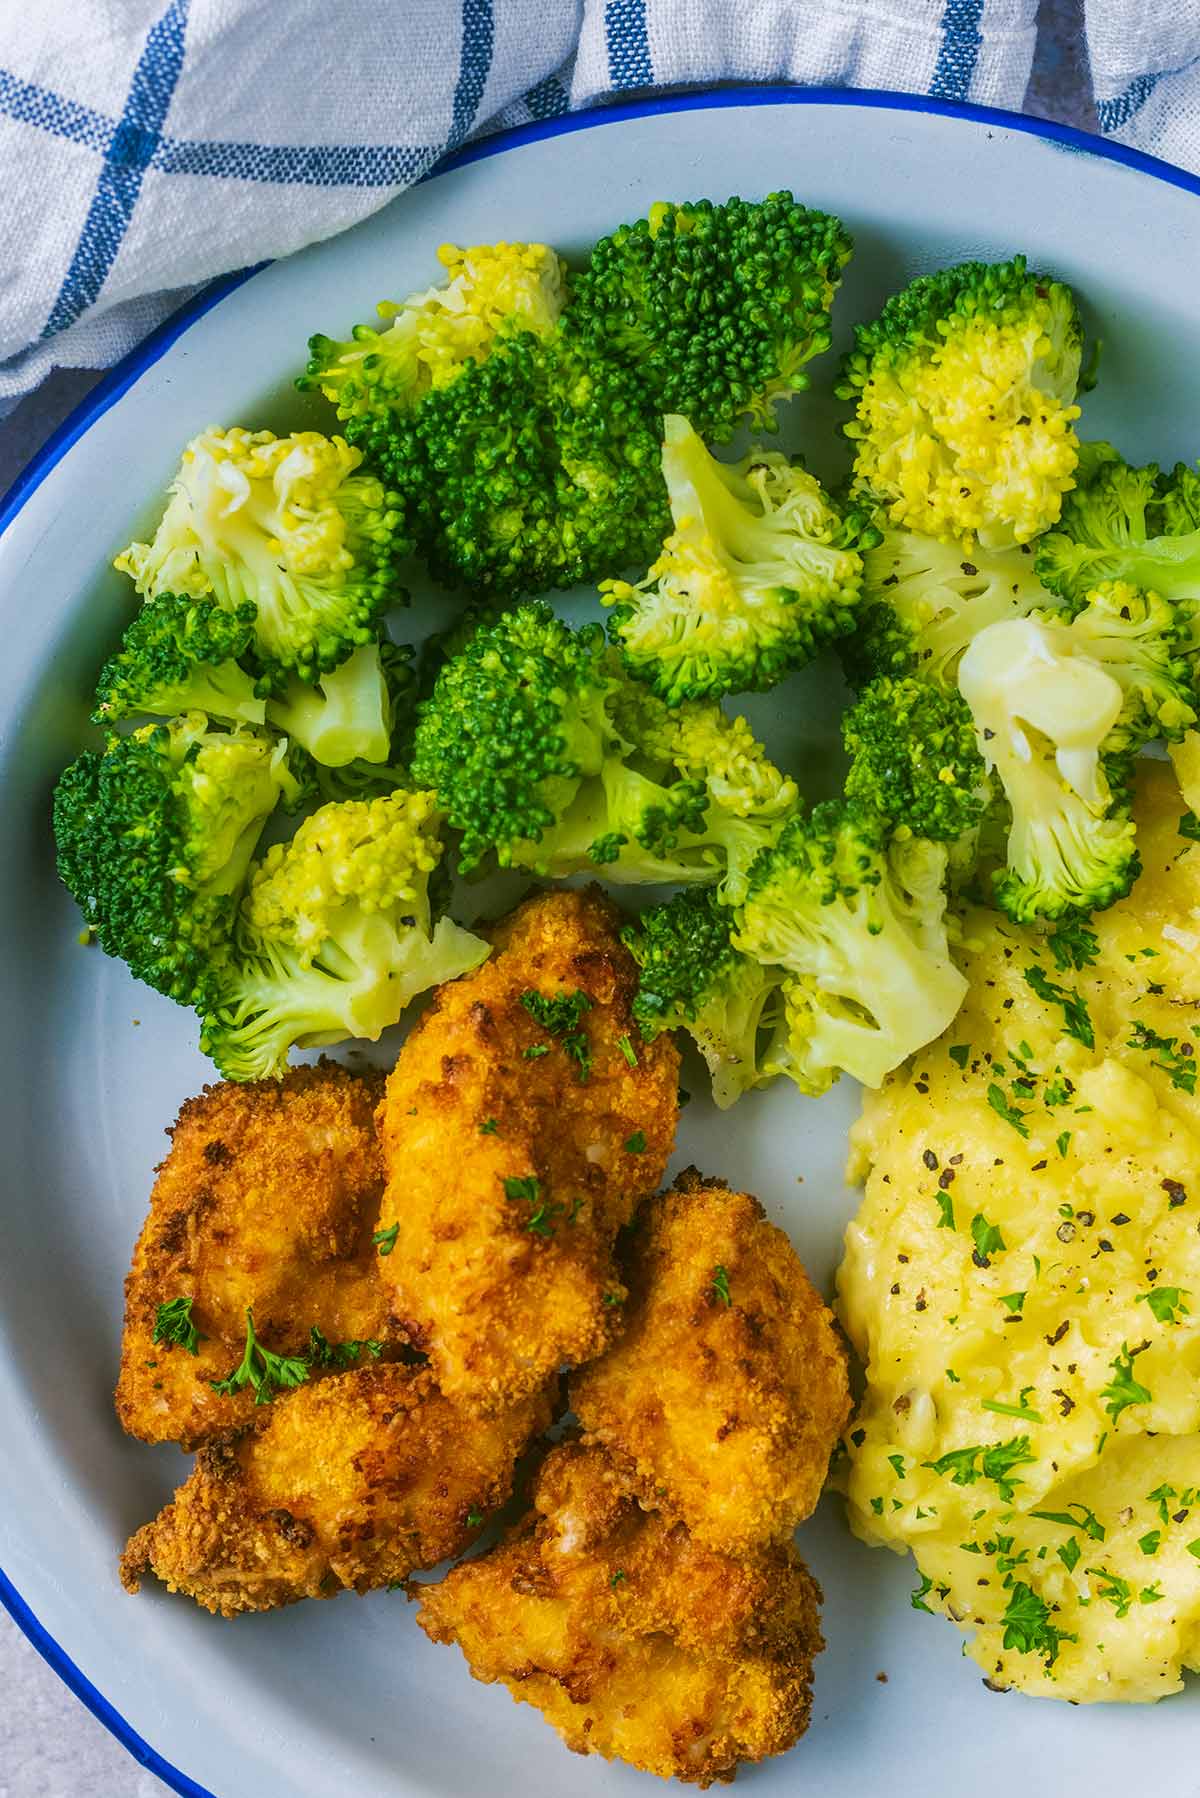 A plate of cooked broccoli, mashed potato and chicken nuggets.